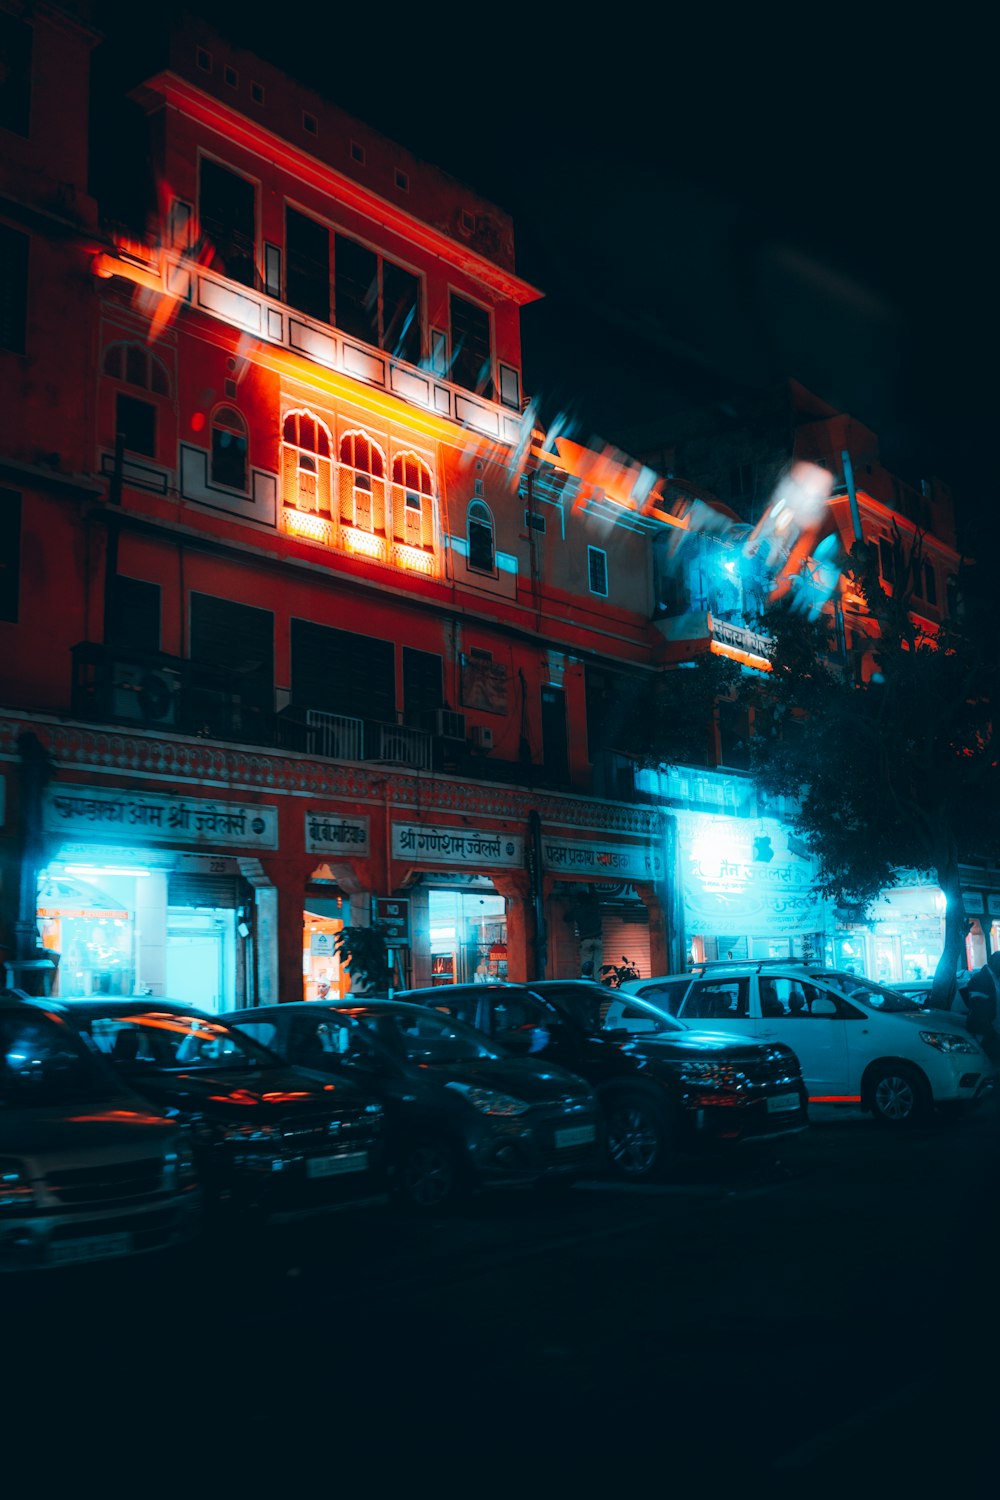 cars parked in front of red building during night time